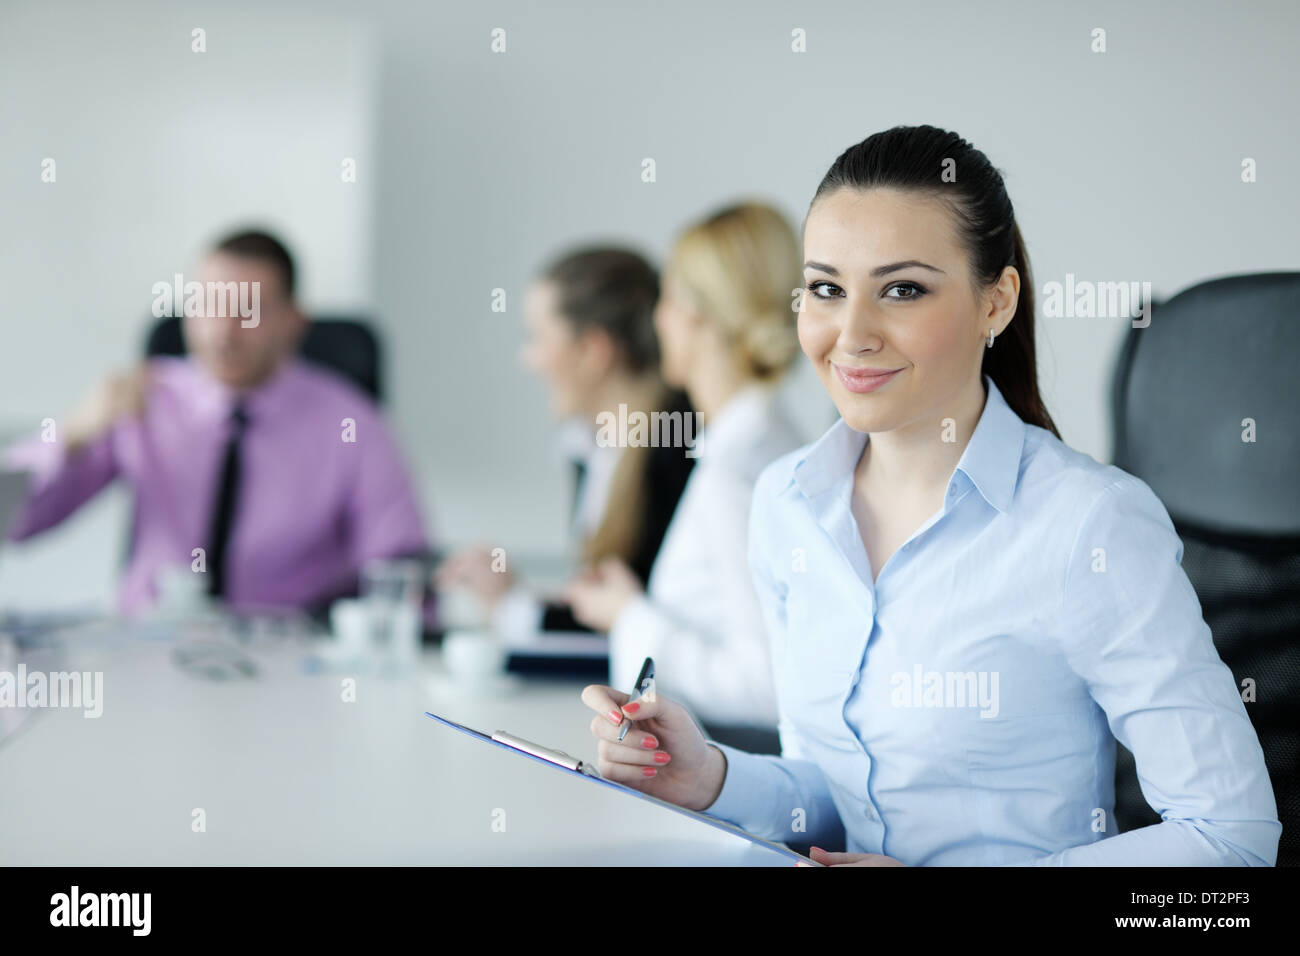 business woman standing with her staff in background Stock Photo